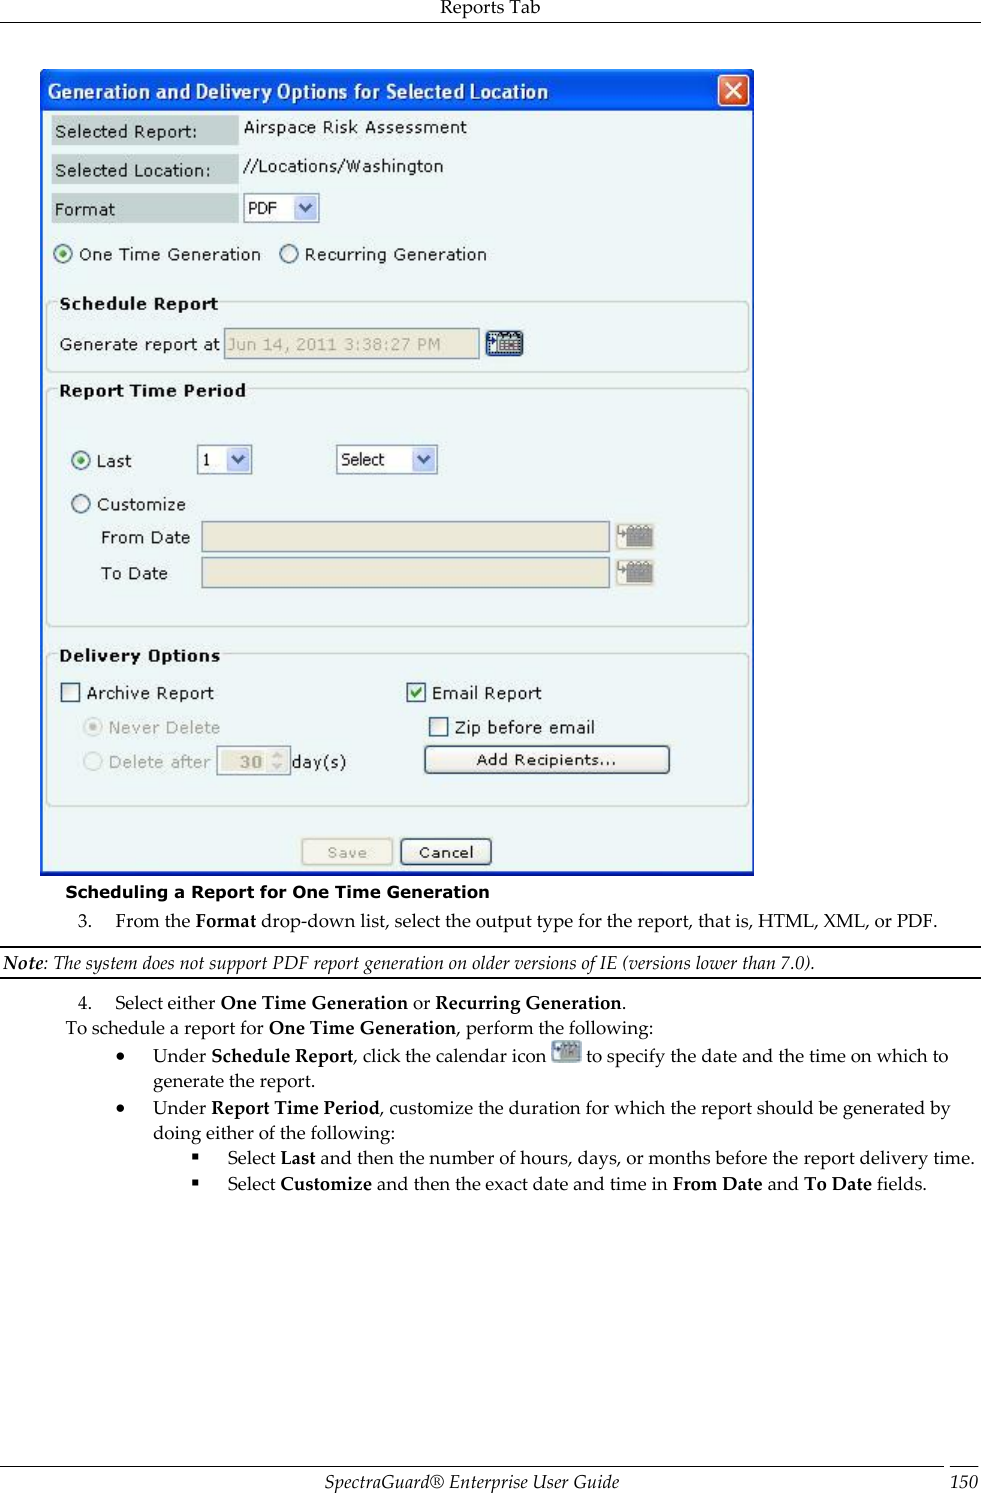 Reports Tab SpectraGuard®  Enterprise User Guide 150  Scheduling a Report for One Time Generation 3. From the Format drop-down list, select the output type for the report, that is, HTML, XML, or PDF. Note: The system does not support PDF report generation on older versions of IE (versions lower than 7.0). 4. Select either One Time Generation or Recurring Generation. To schedule a report for One Time Generation, perform the following:  Under Schedule Report, click the calendar icon   to specify the date and the time on which to generate the report.  Under Report Time Period, customize the duration for which the report should be generated by doing either of the following:  Select Last and then the number of hours, days, or months before the report delivery time.  Select Customize and then the exact date and time in From Date and To Date fields.   